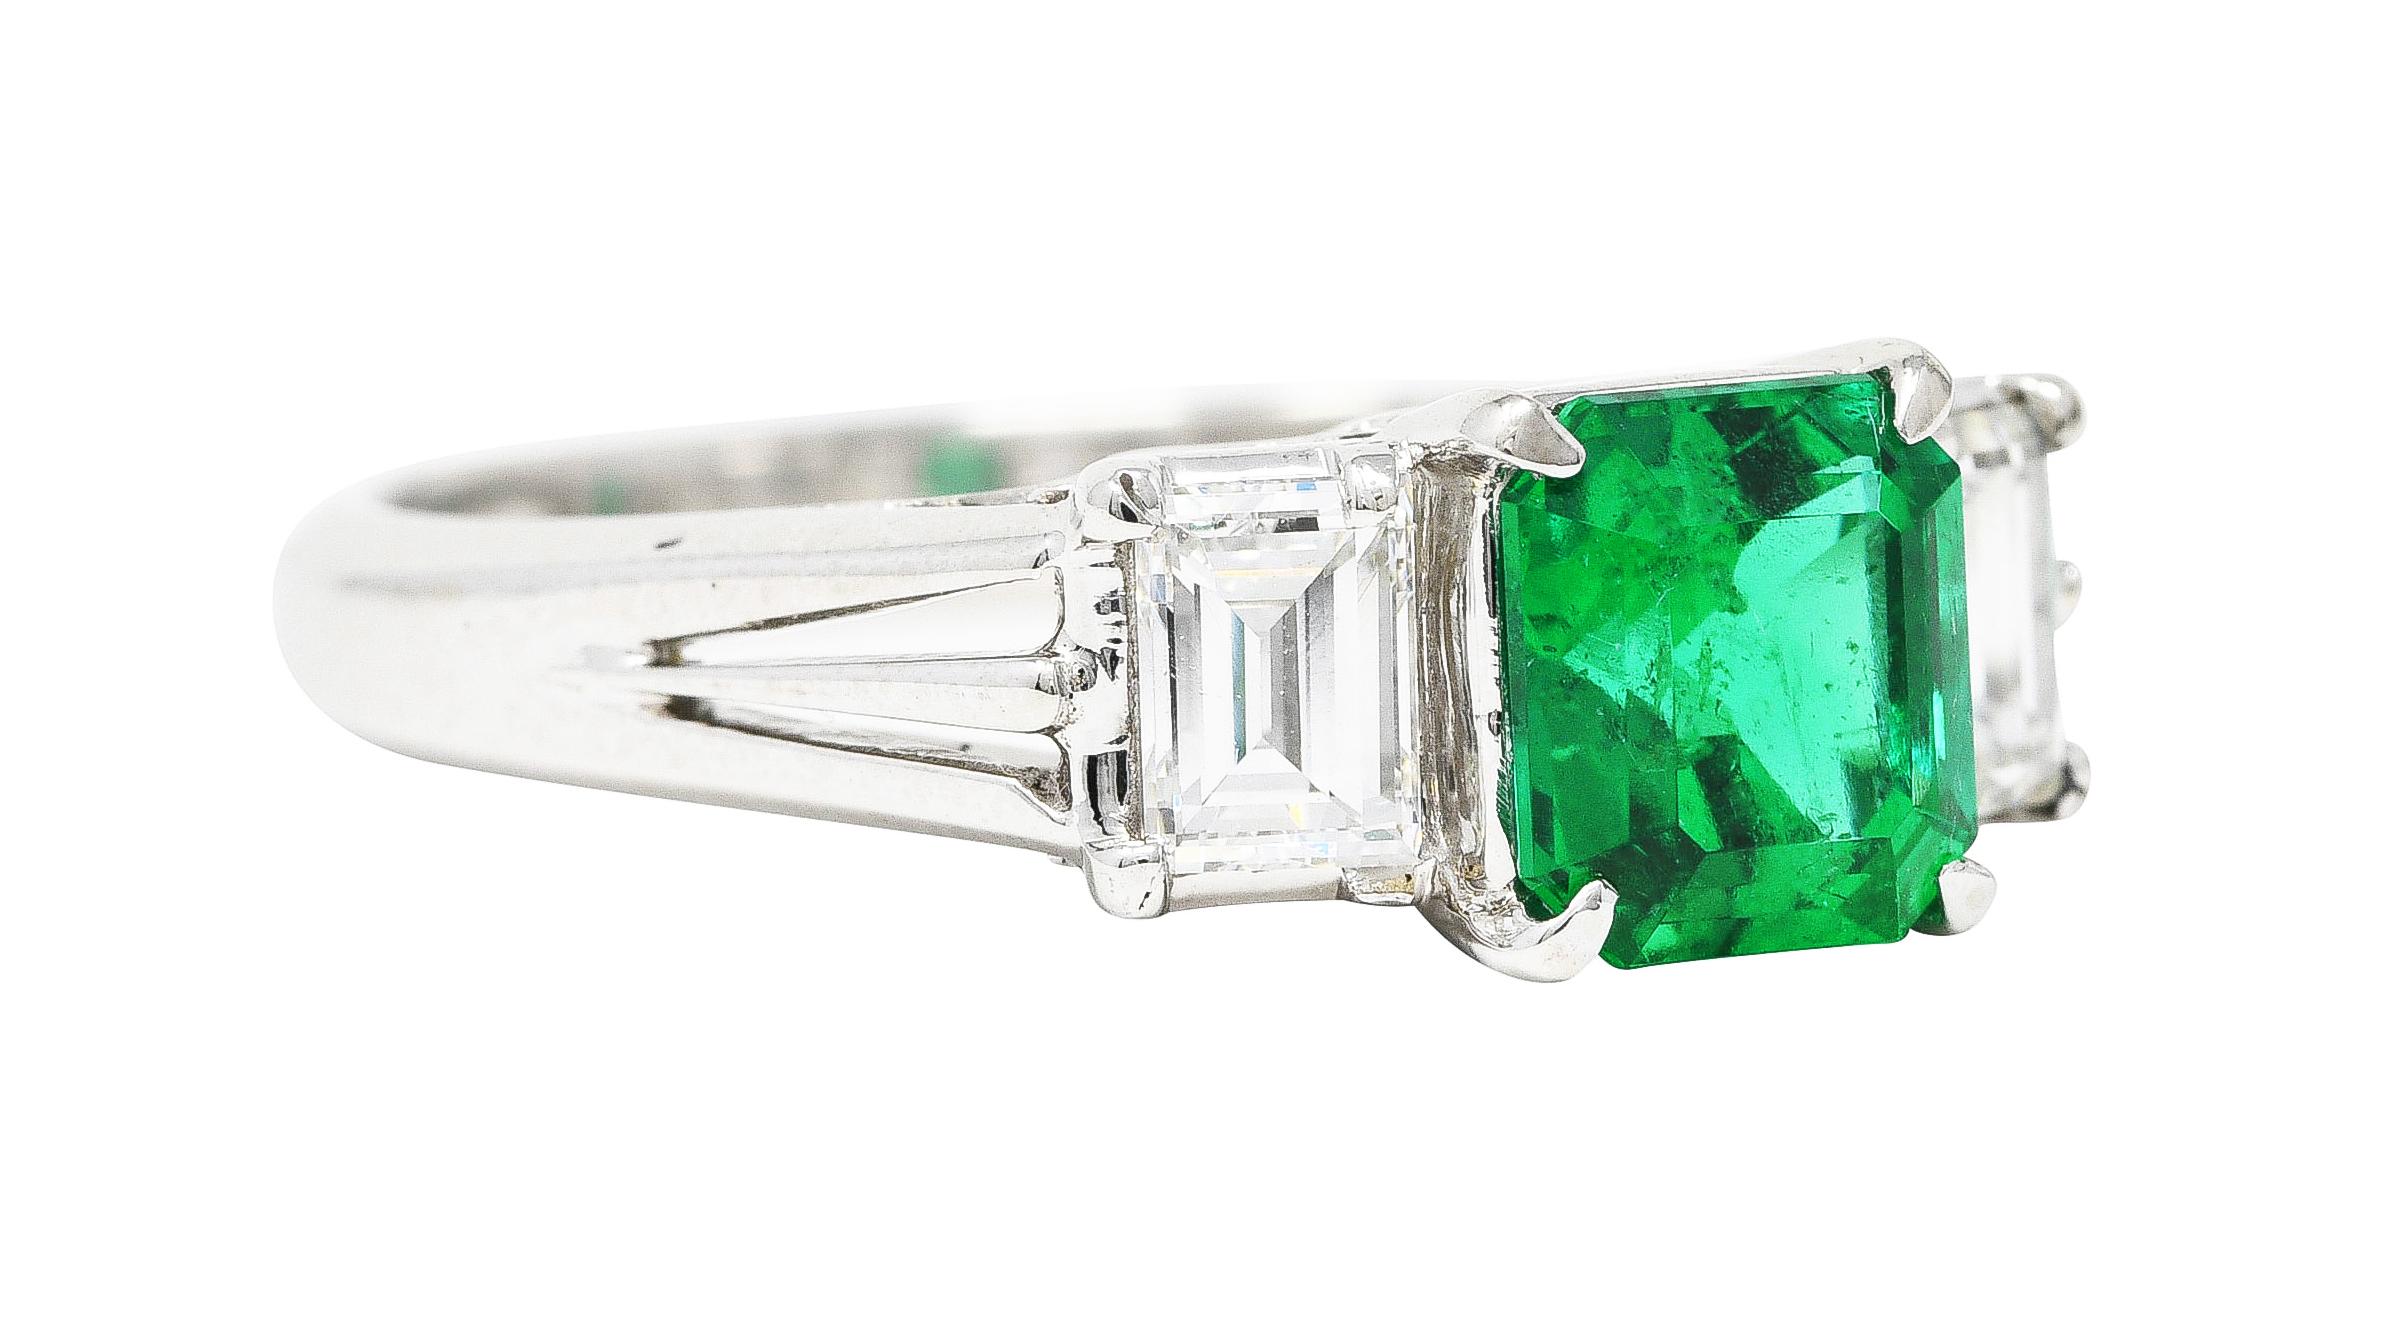 Ring is prong set to front by three gemstones in a stepped form. Centering an emerald cut Colombian emerald weighing 1.24 carats. Transparent and richly green in color - natural inclusions with moderate clarity enhancement (F2). Flanked by baguette